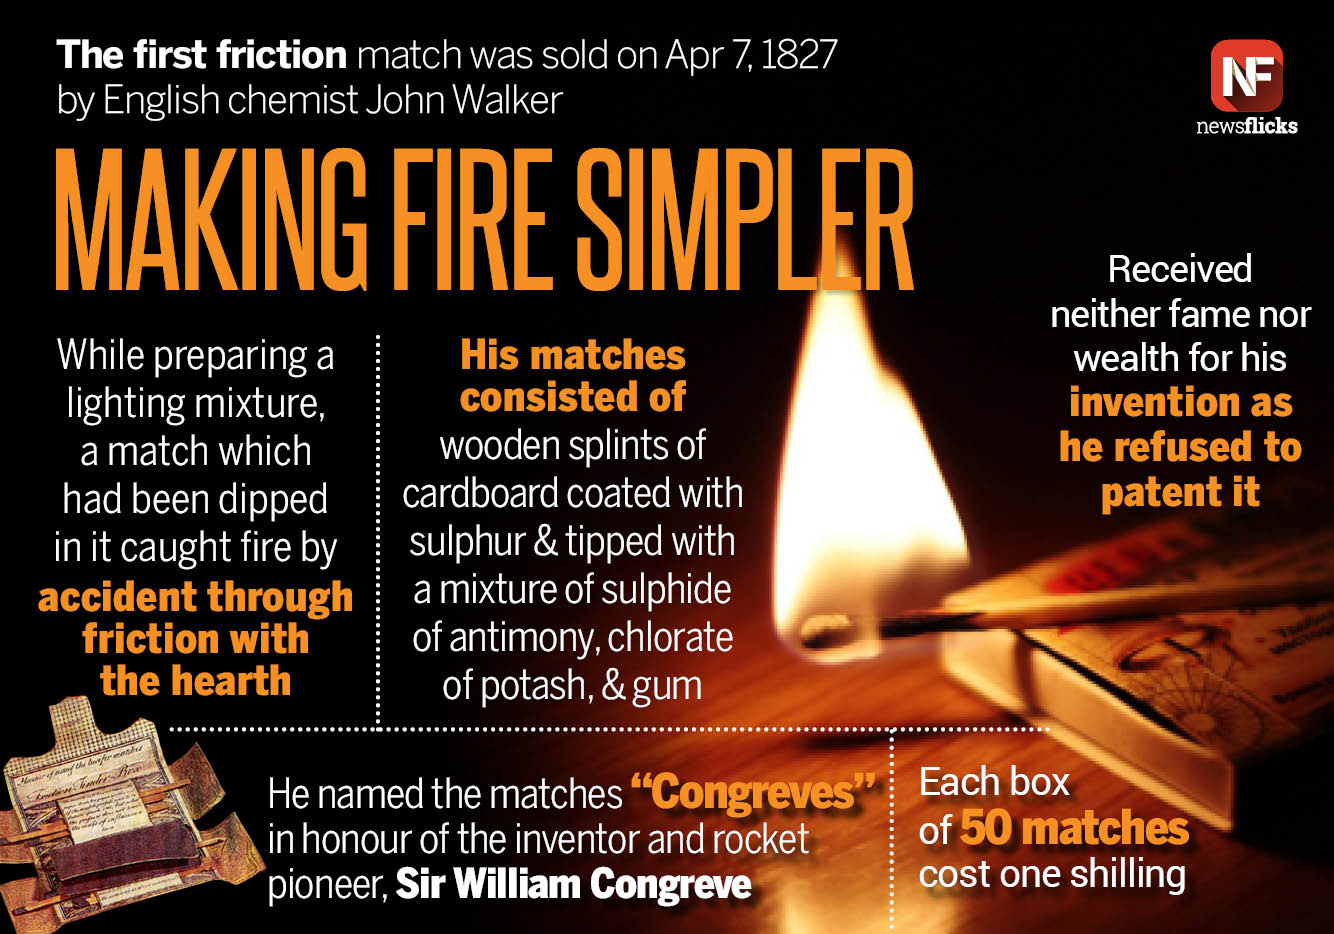 Newsflicks on Twitter: "The first friction match was sold on Apr 7, 1827 by English chemist John Walker https://t.co/MuGDYzsk5B" / Twitter